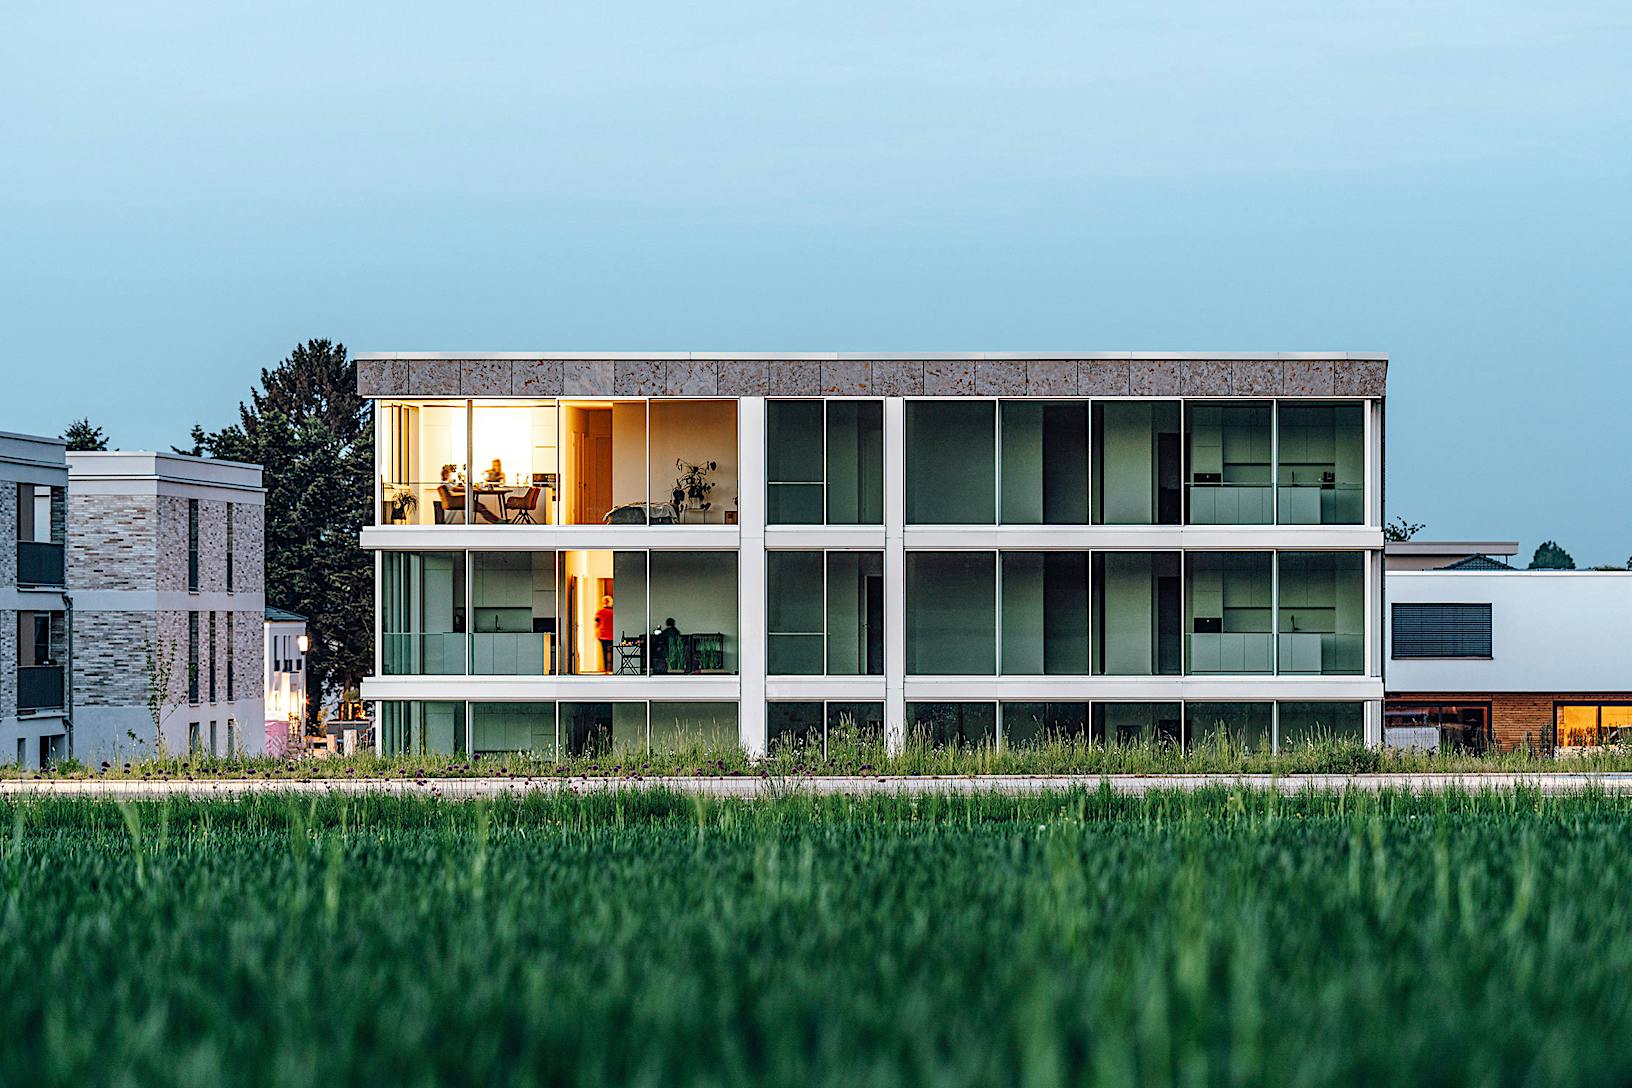 A modern multifamily building with glass walls, nestled in the middle of a serene grassy field